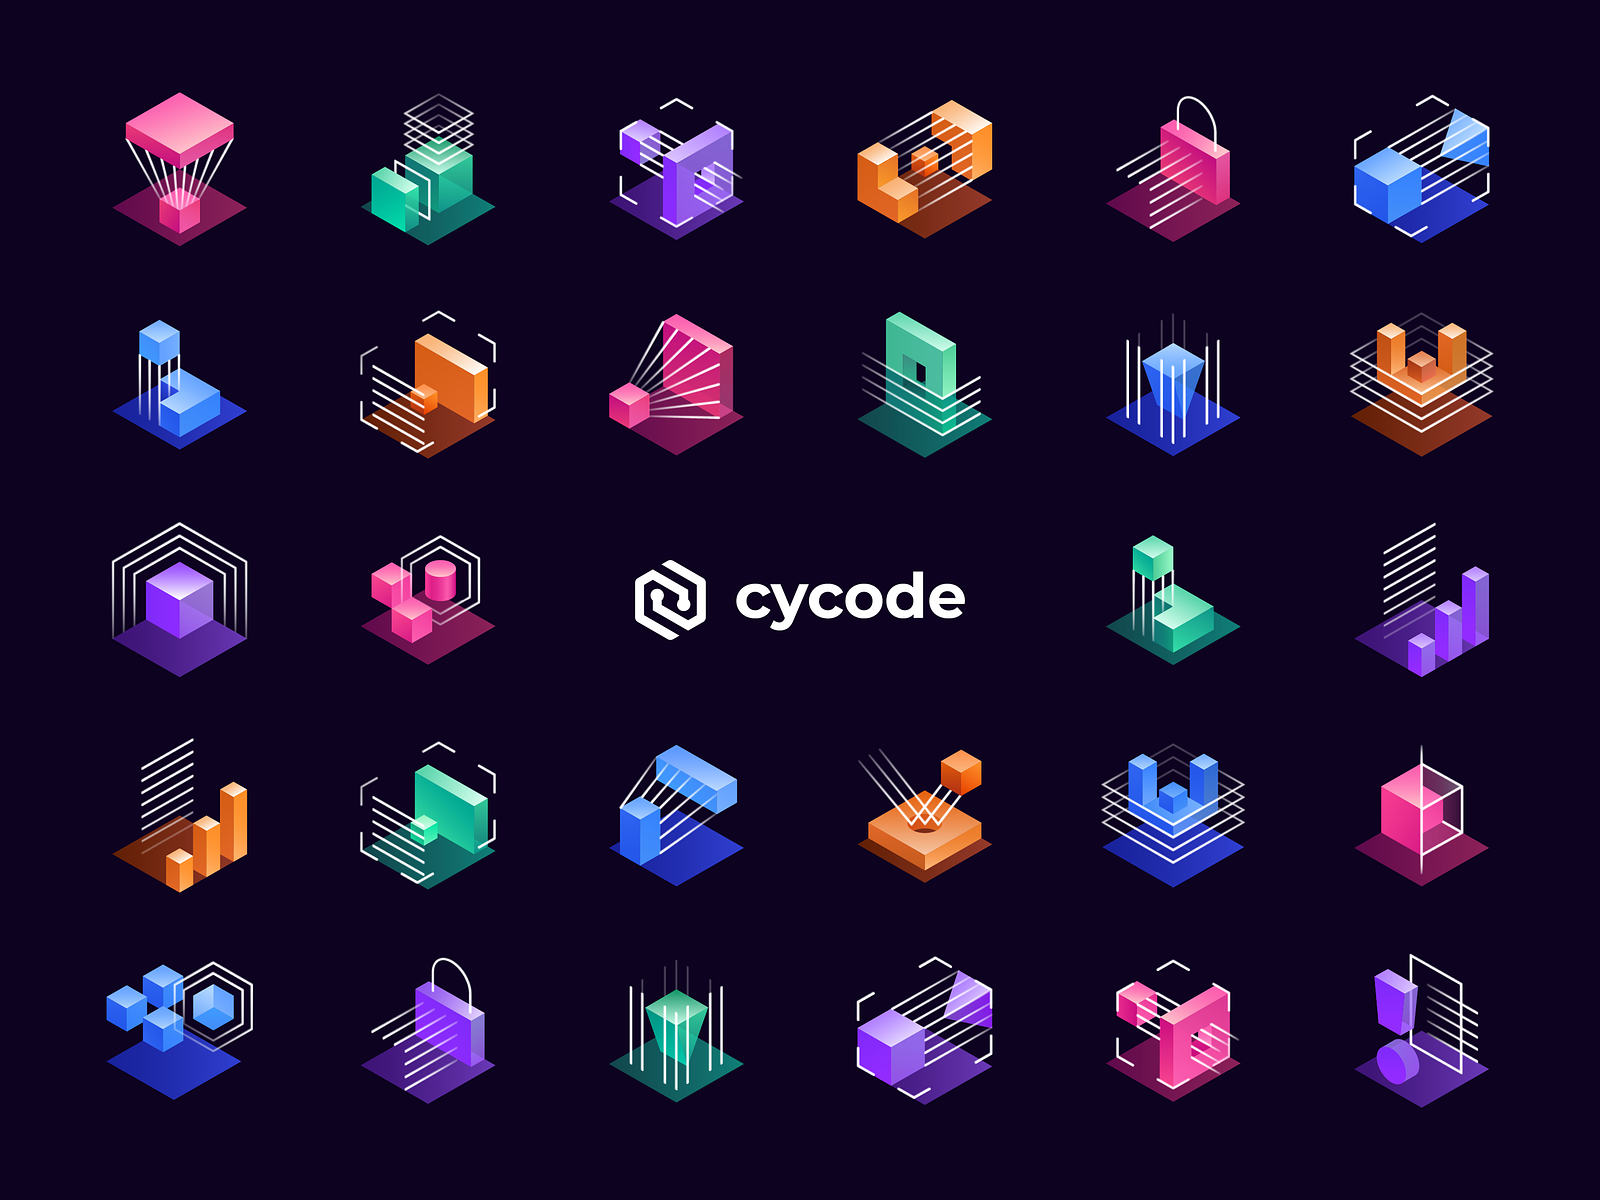 Cycode Branding Visual Identity Corporate Brand Design By Ramotion On Dribbble